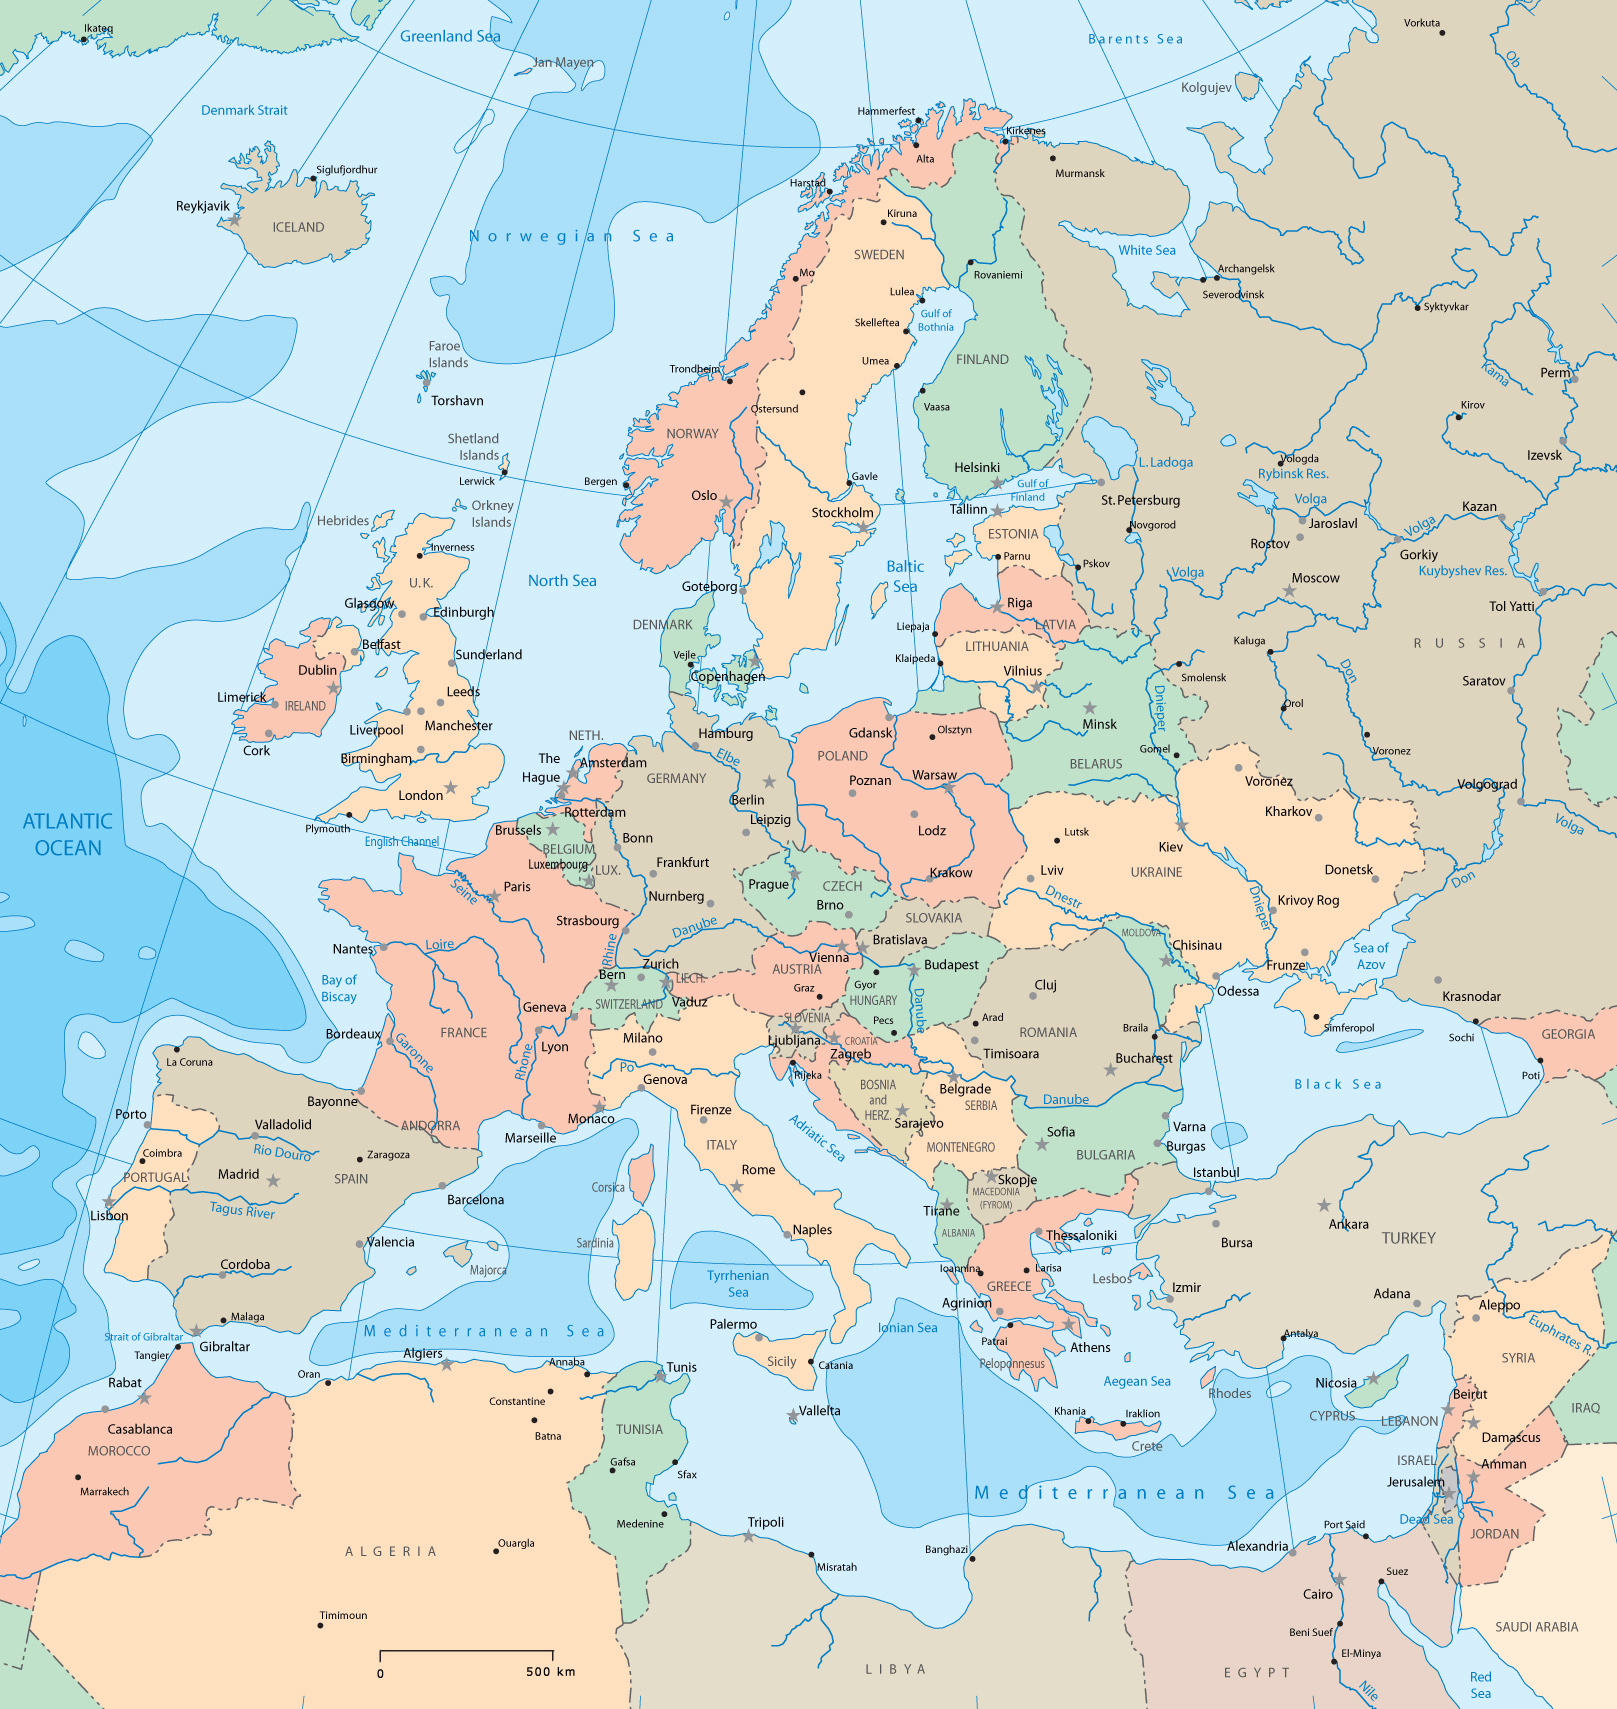 Large Detailed Political Map Of Europe Europe Large Detailed Political